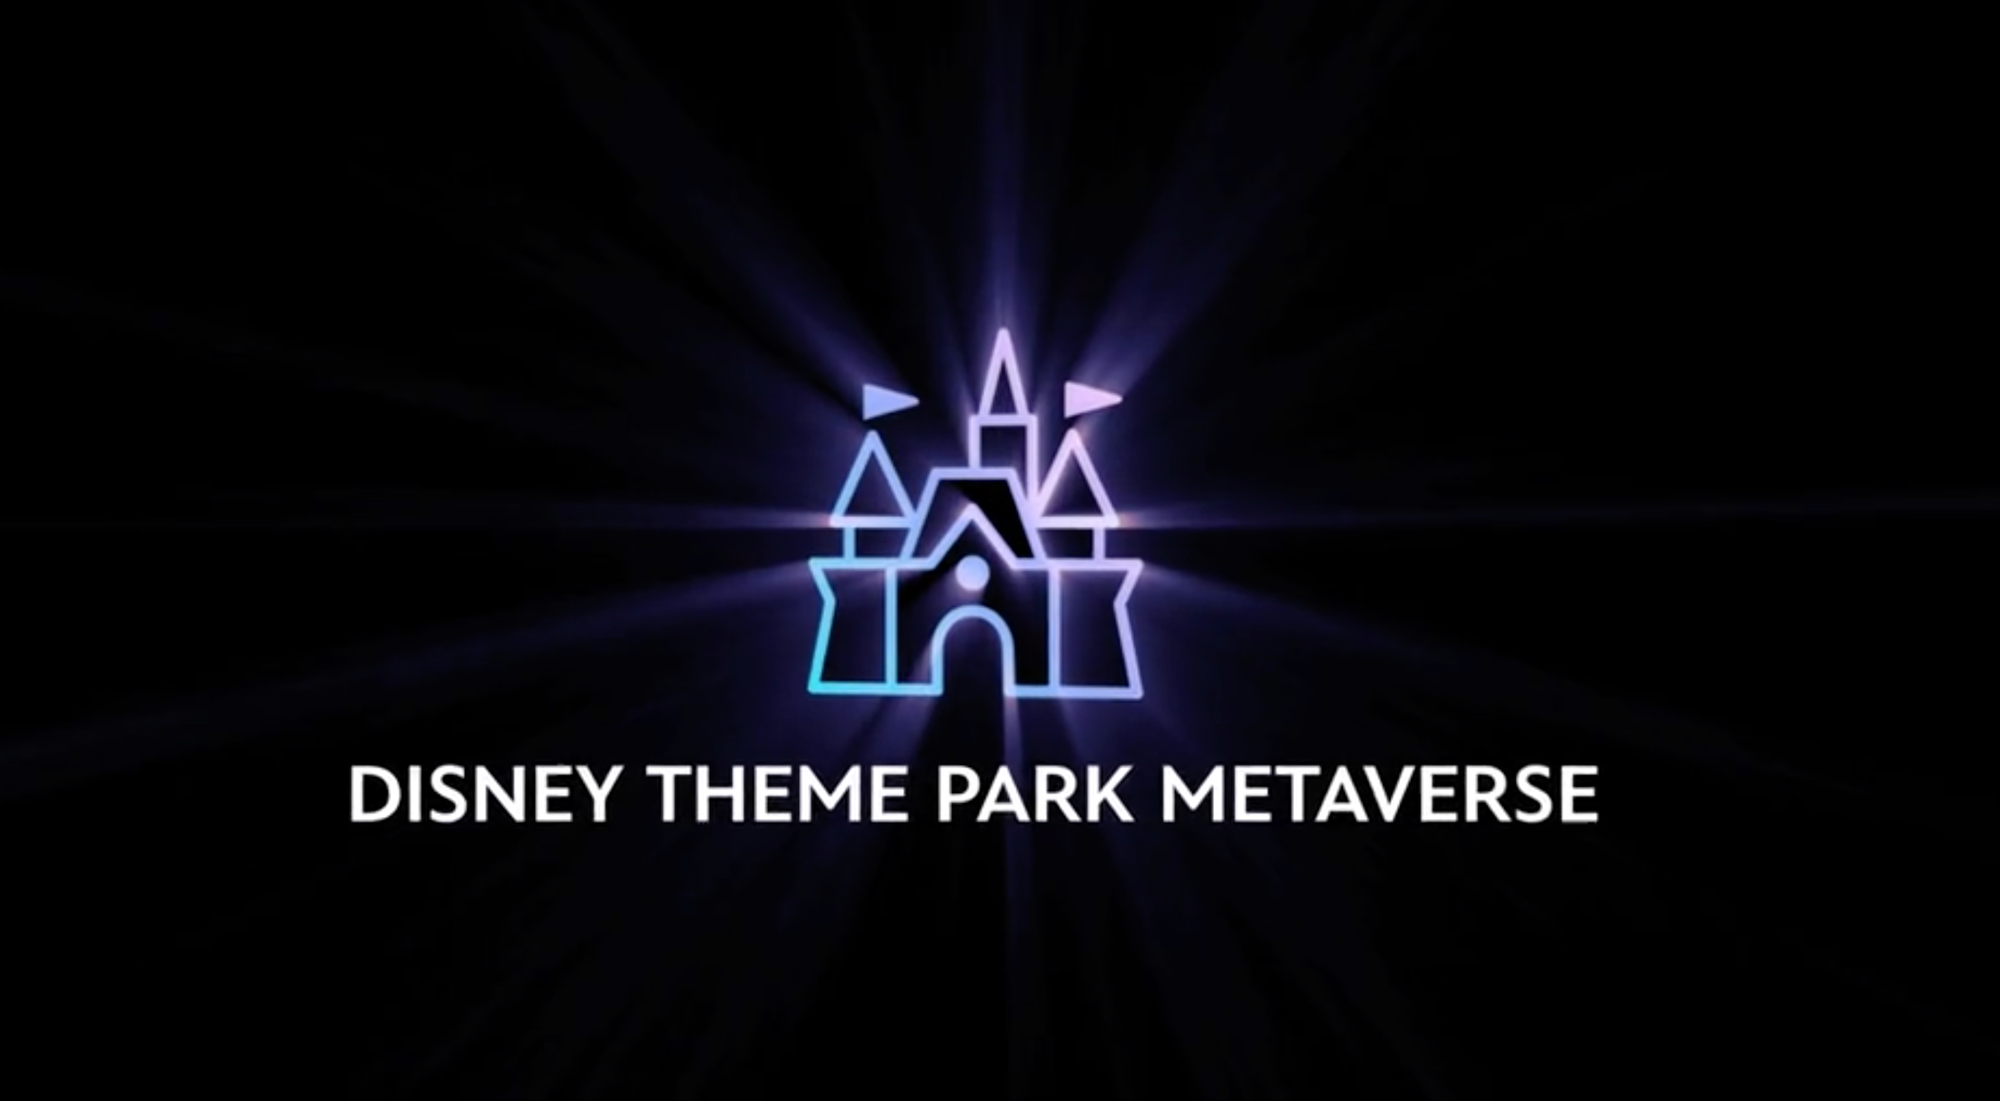 Disney wants to become the happiest place in the metaverse